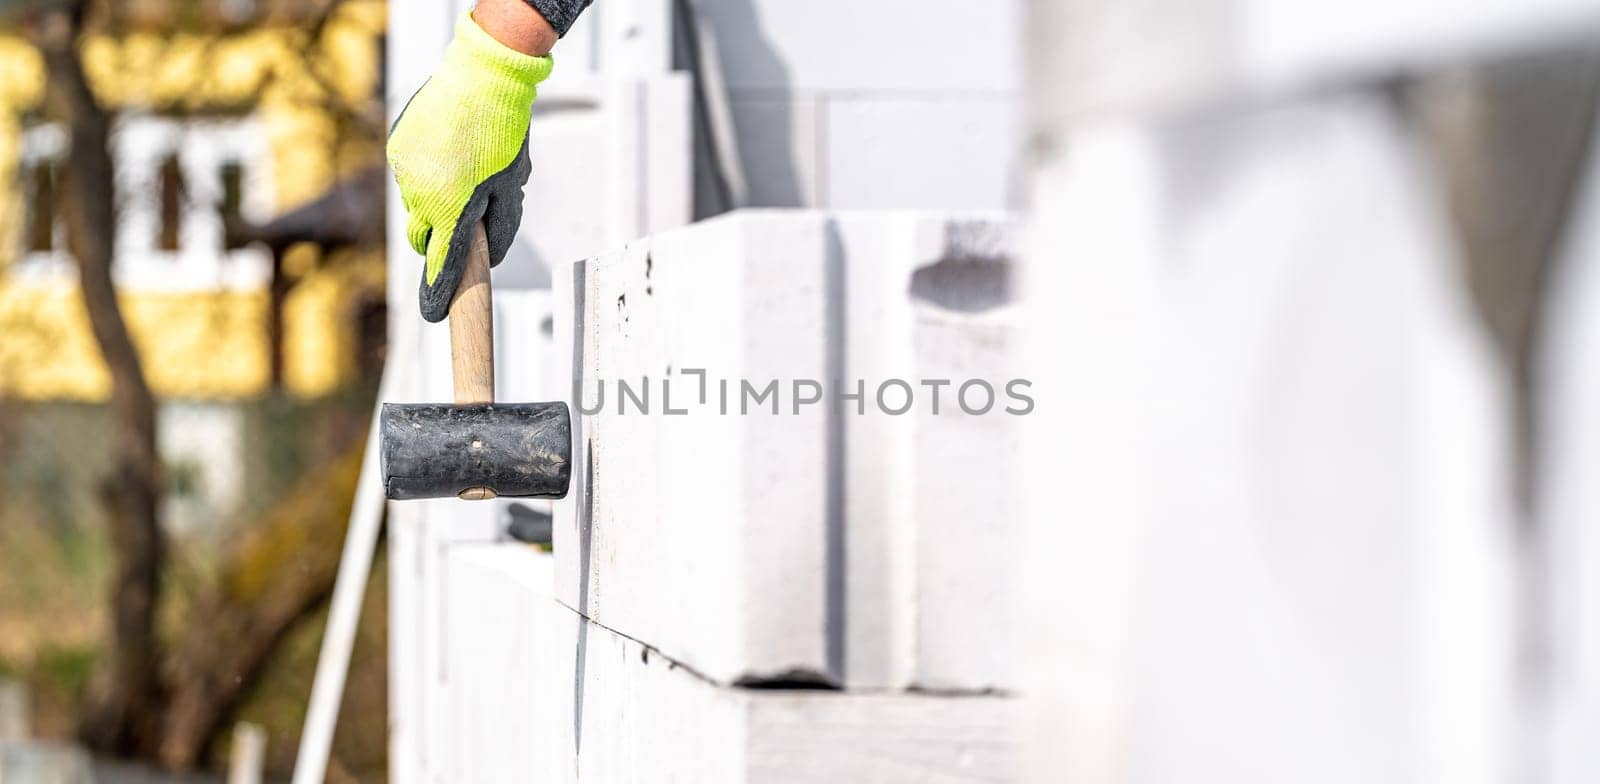 leveling walls with a rubber hammer when building a house. High quality photo